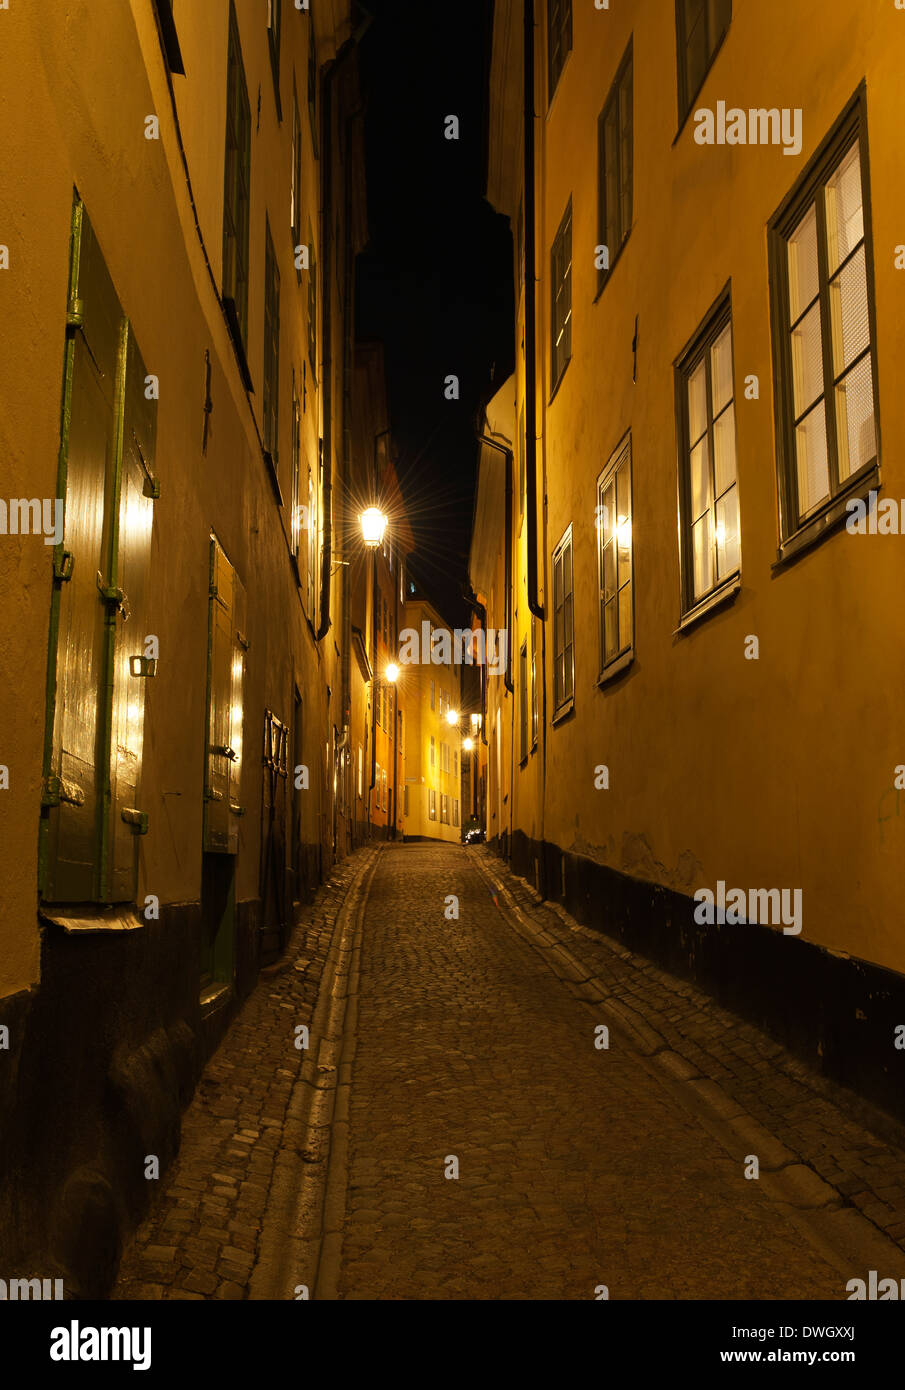 Evening view of Baggensgatan, a narrow street in Gamla Stan, the old town, of Stockholm, Sweden Stock Photo